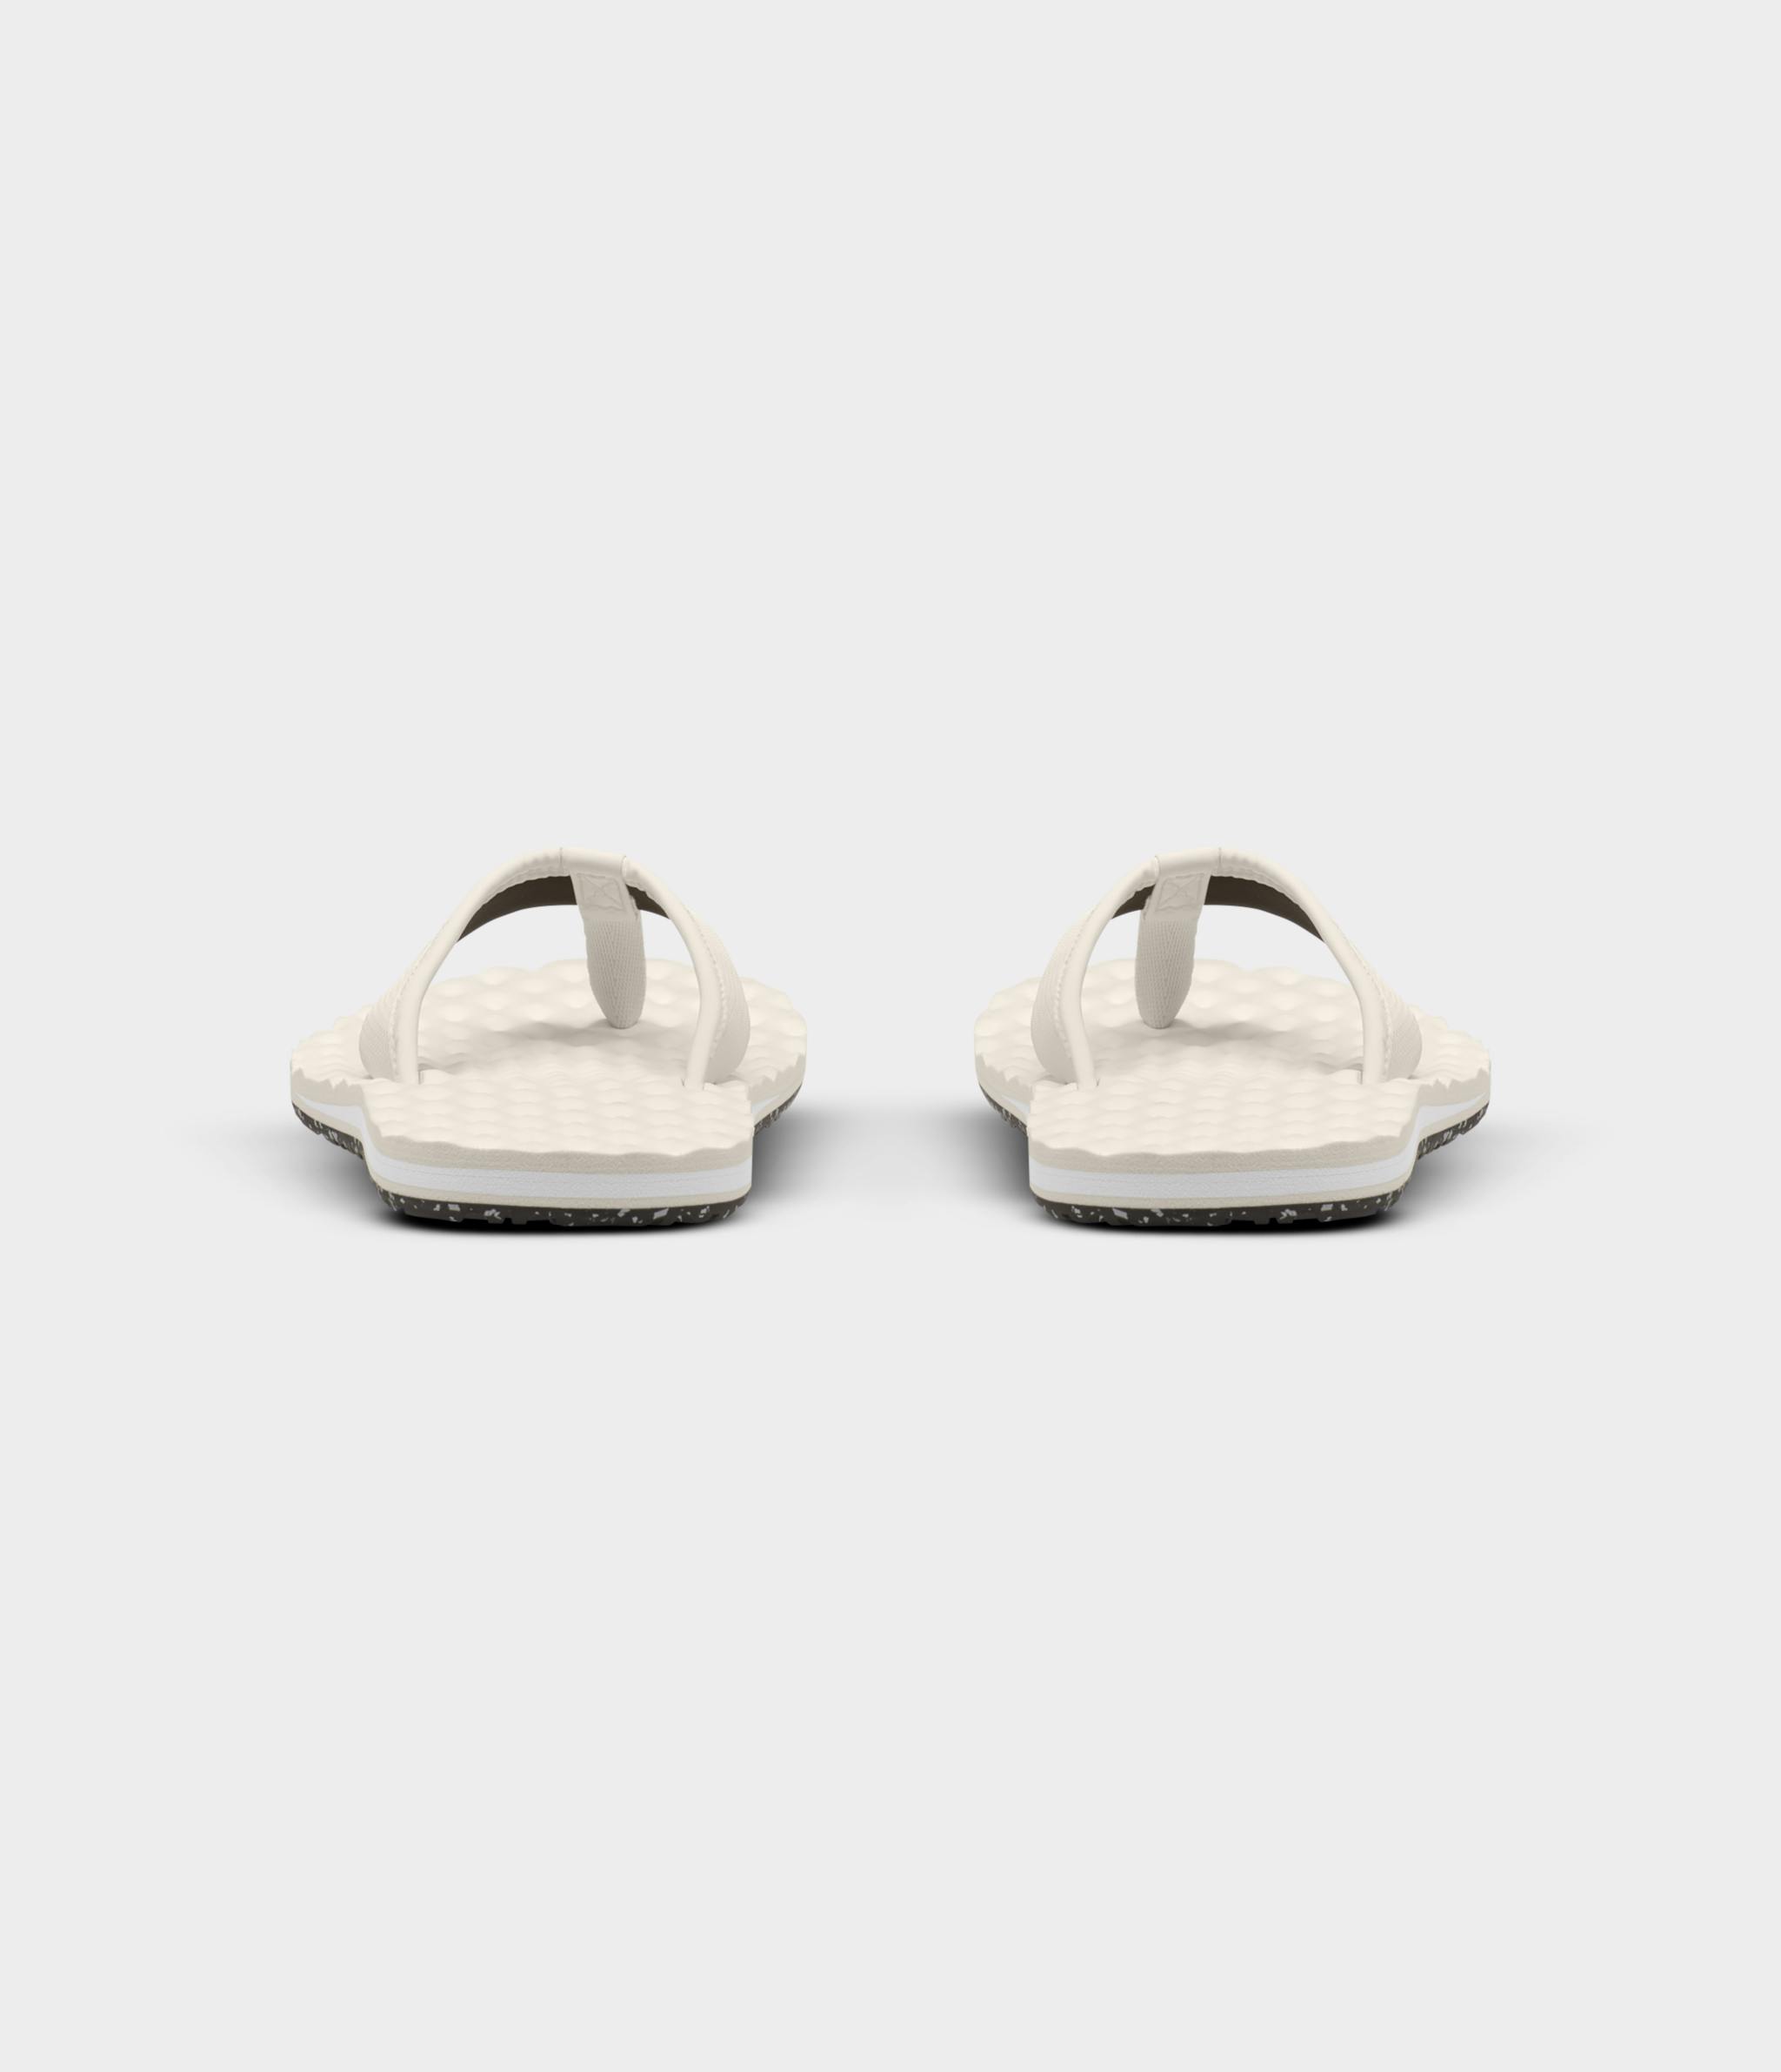 The North Face Women's Base Camp Mini II Sandals